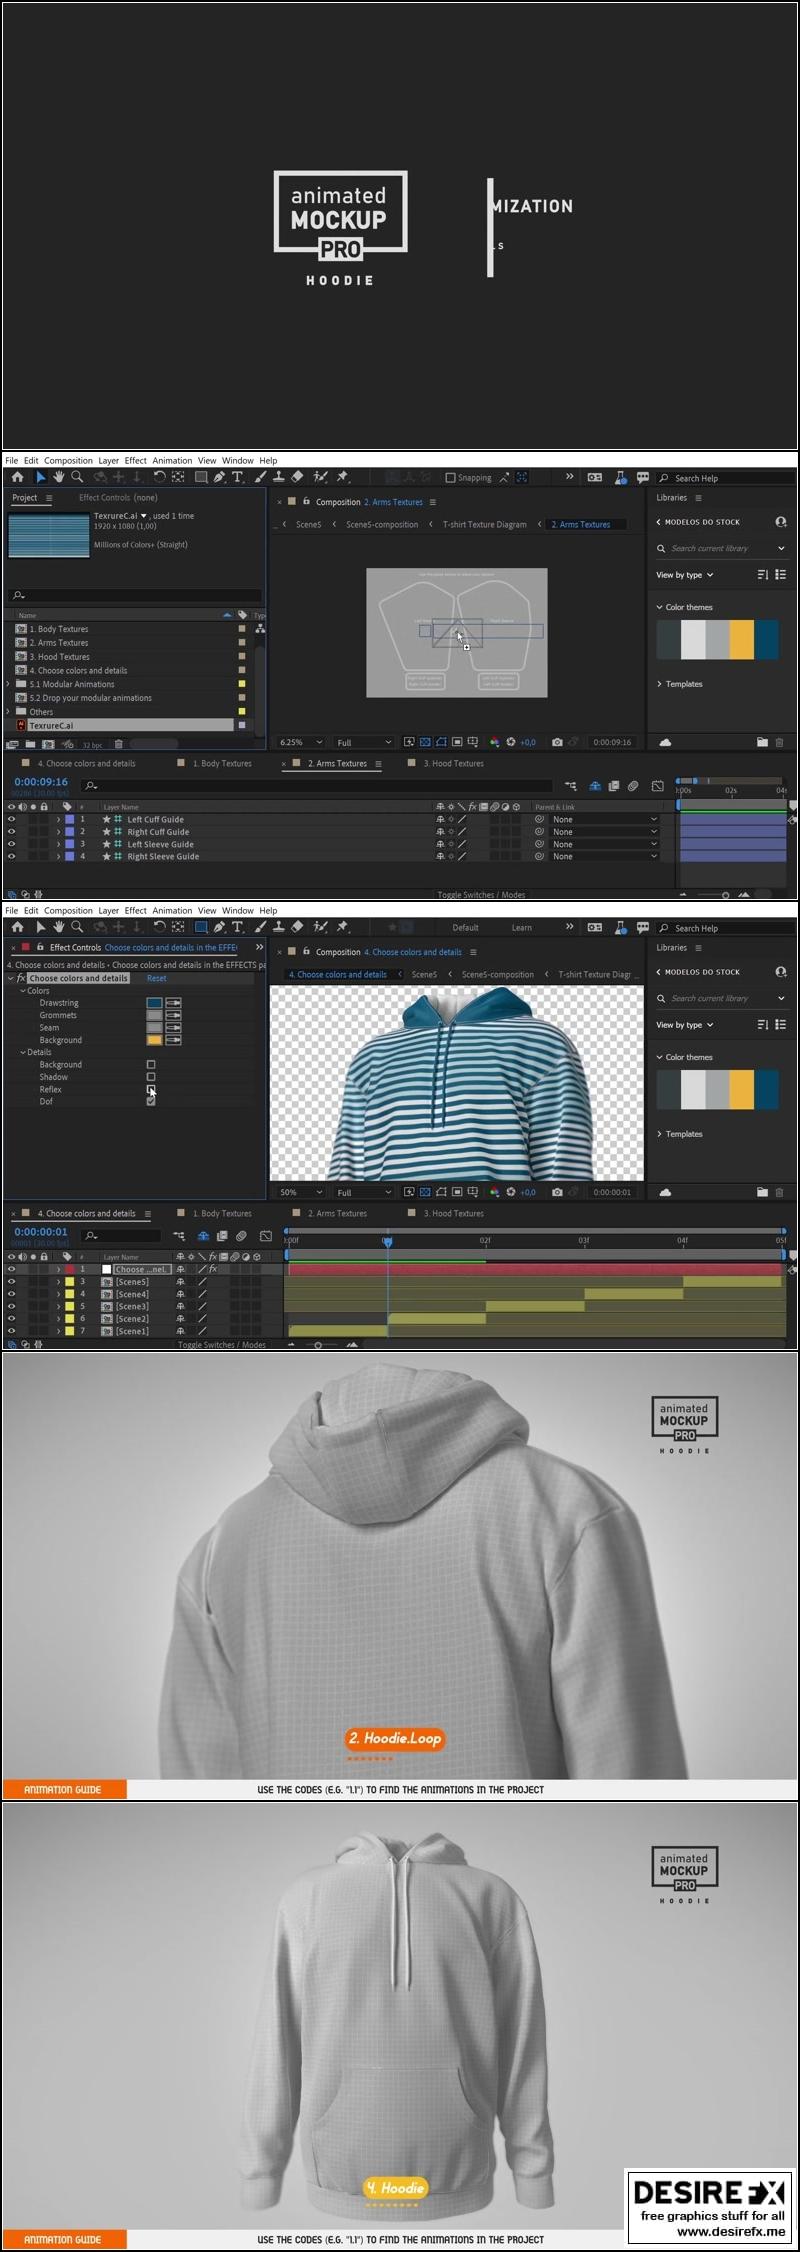 Download Desire Fx 3d Models Videohive Hoodie Mockup Template Animated Mockup Pro 31573152